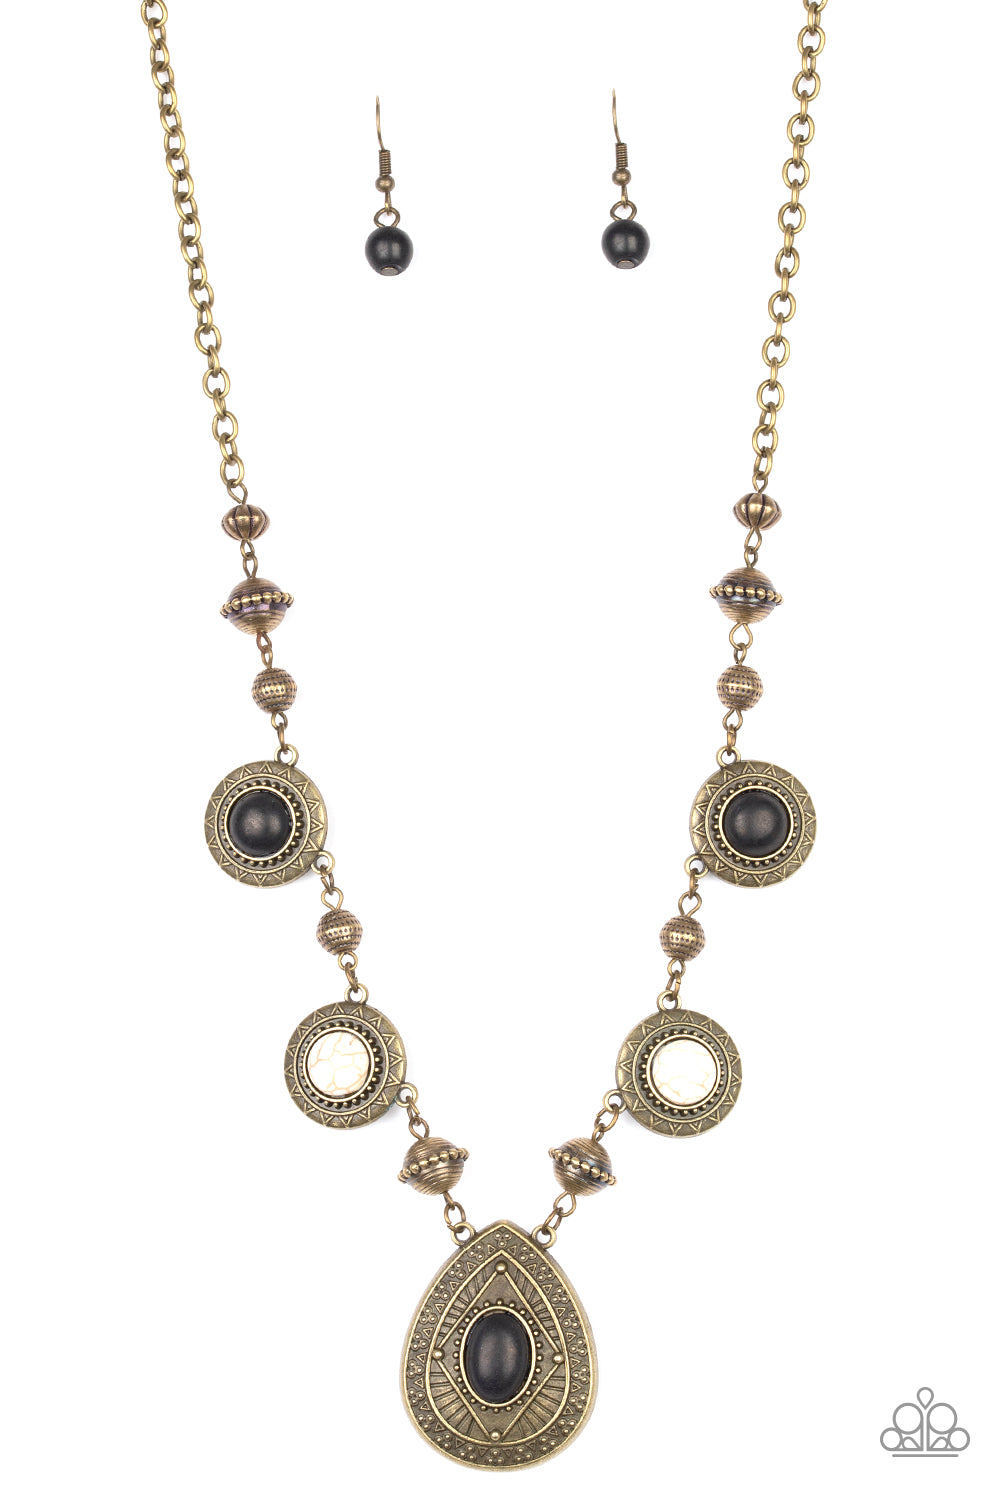 Paparazzi New Brass and black necklace with circles throughout. Includes a bonus pair of earrings.